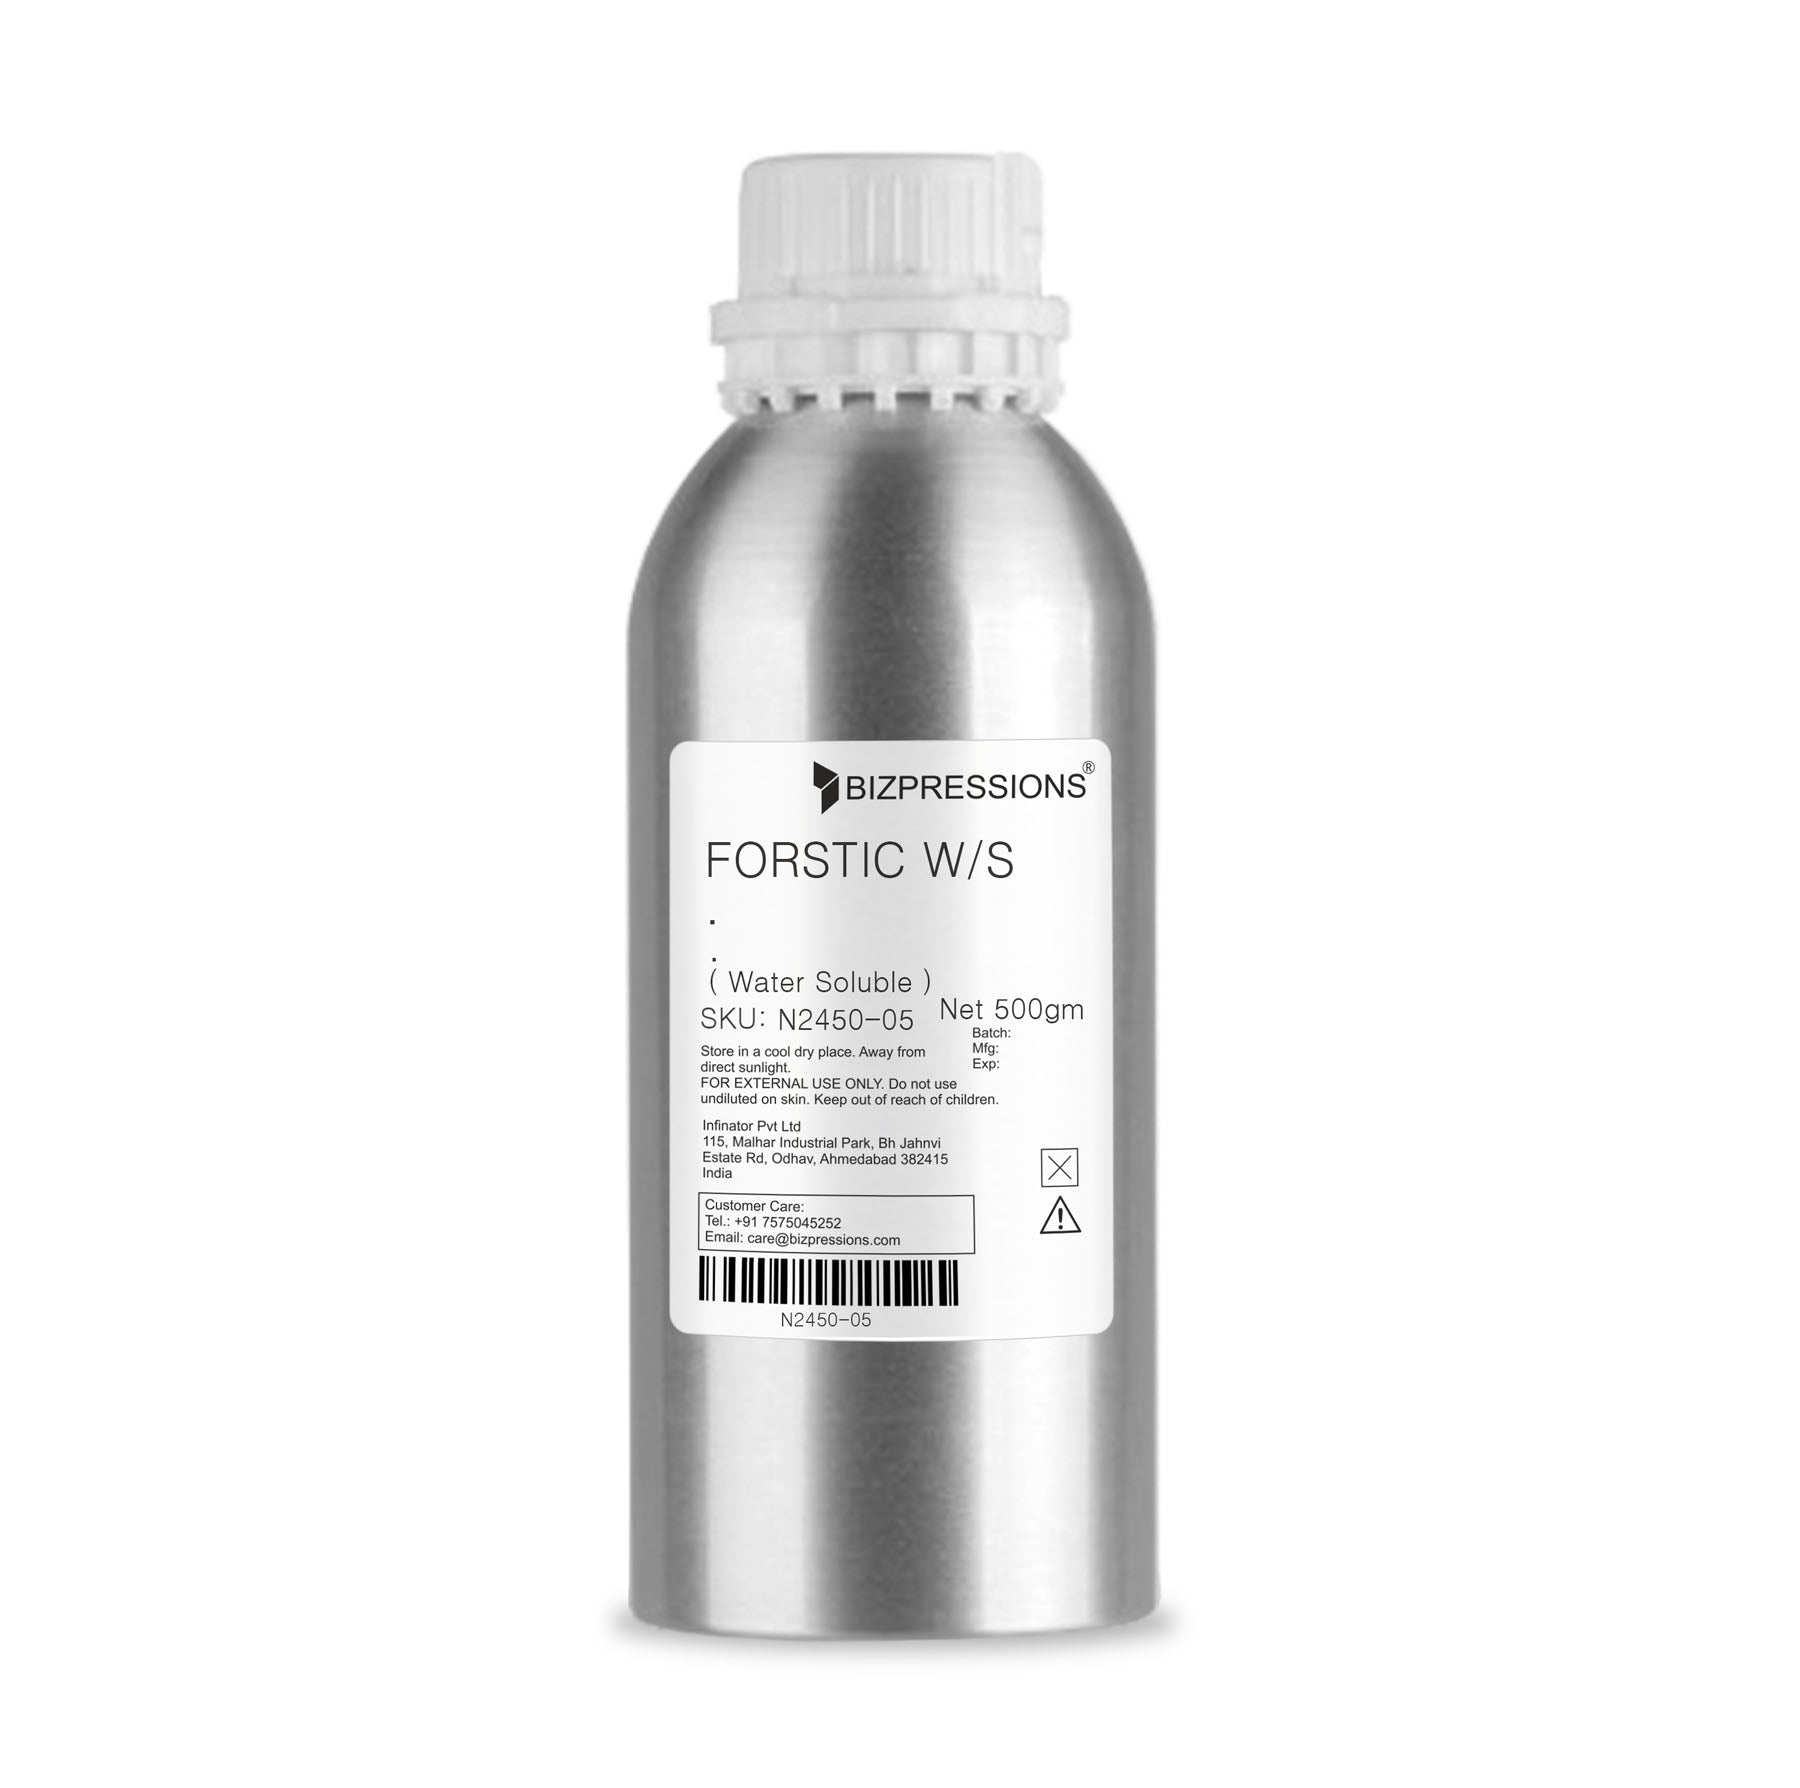 FORSTIC W/S - Fragrance ( Water Soluble ) - 500 gm